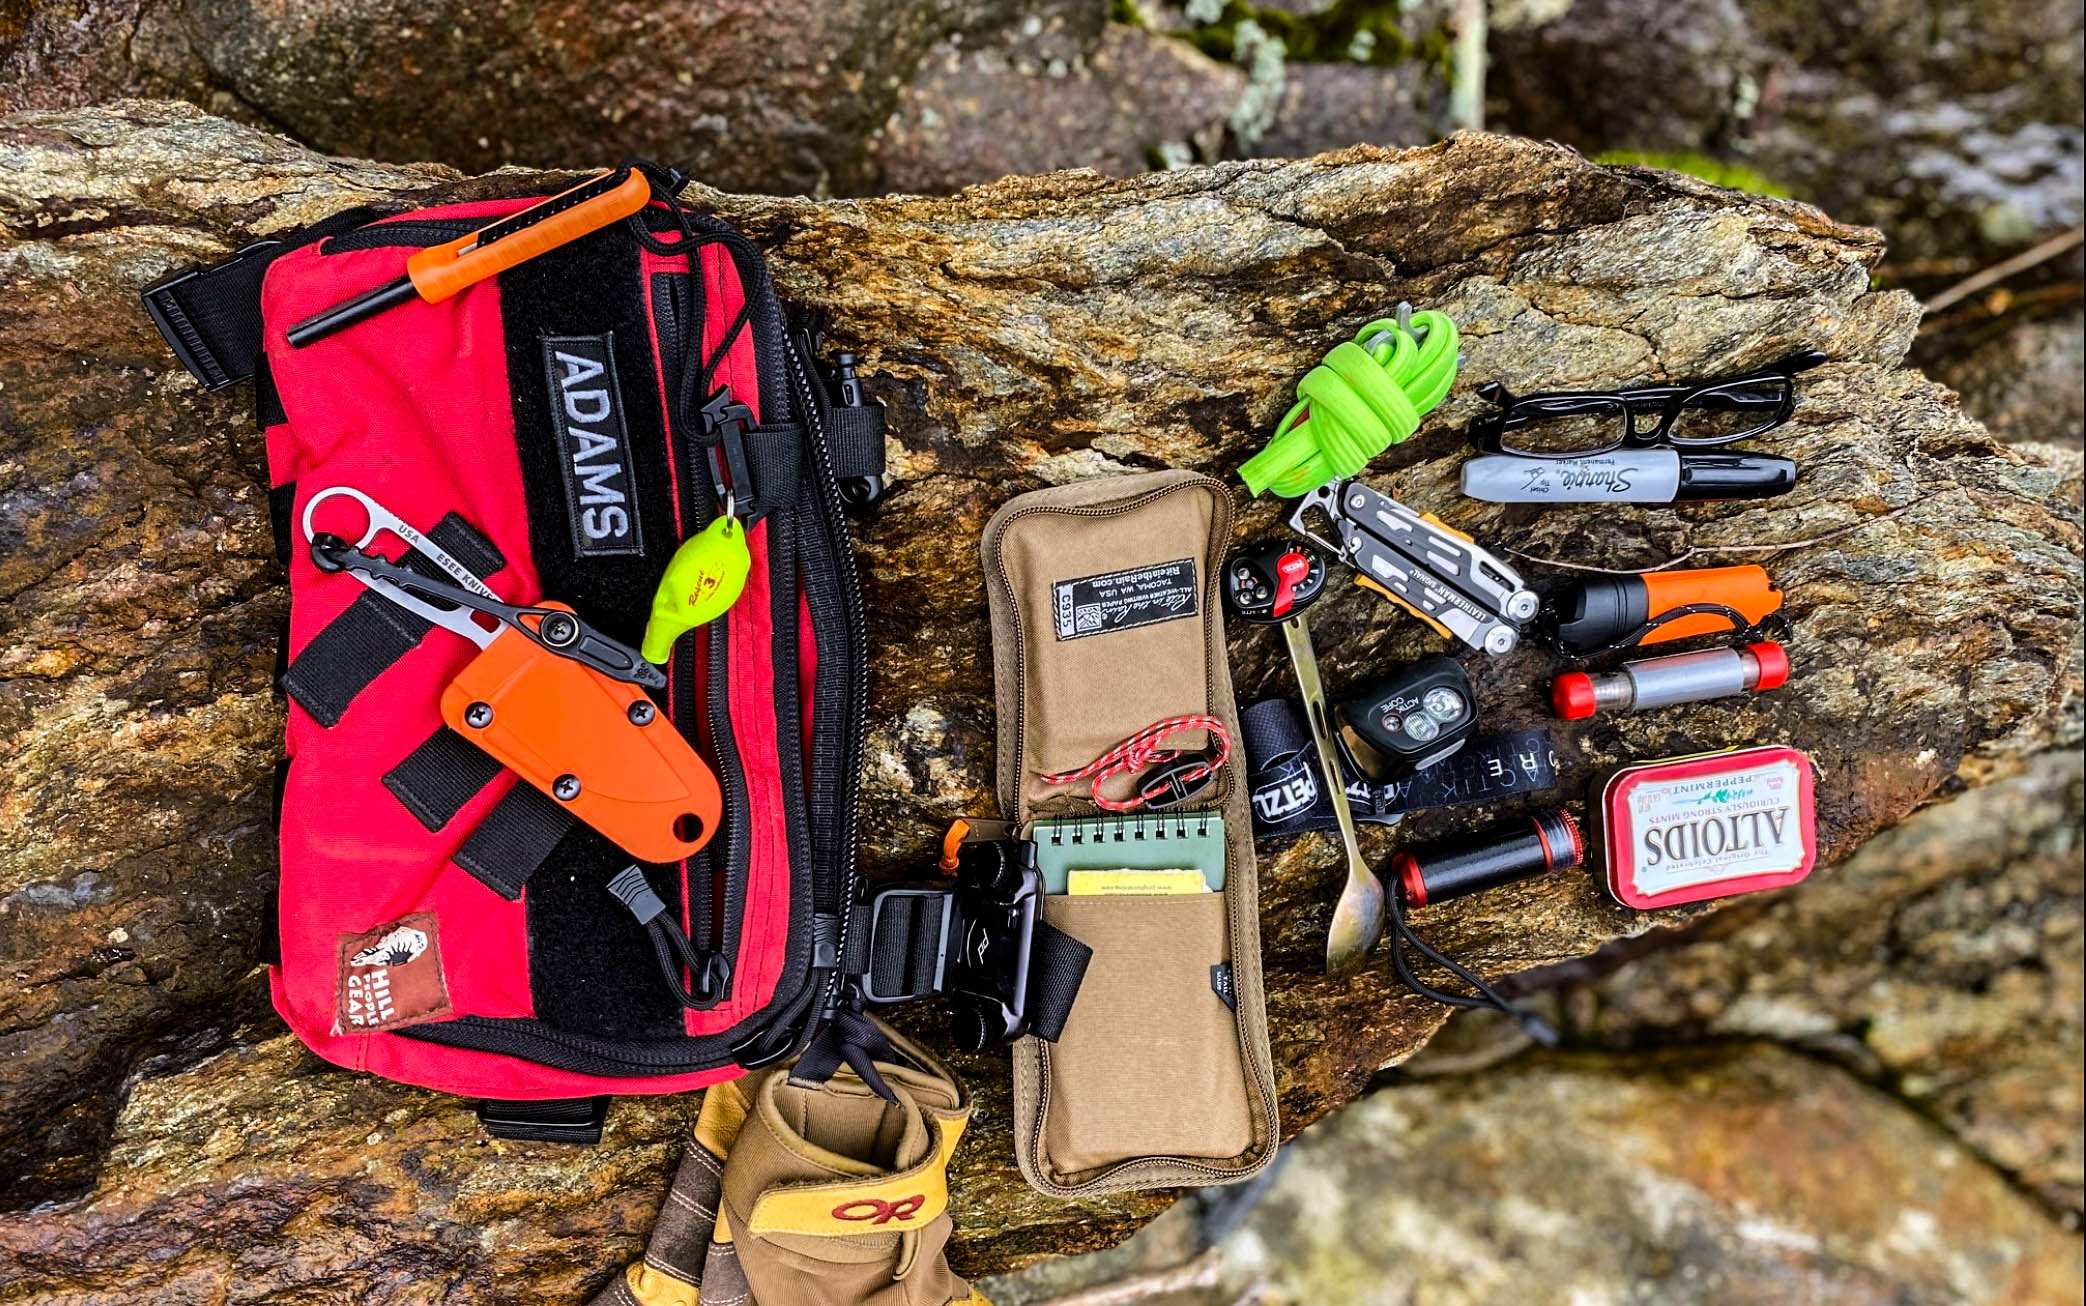 How to DIY a Survival Kit for Camping and Other Outdoor Adventures